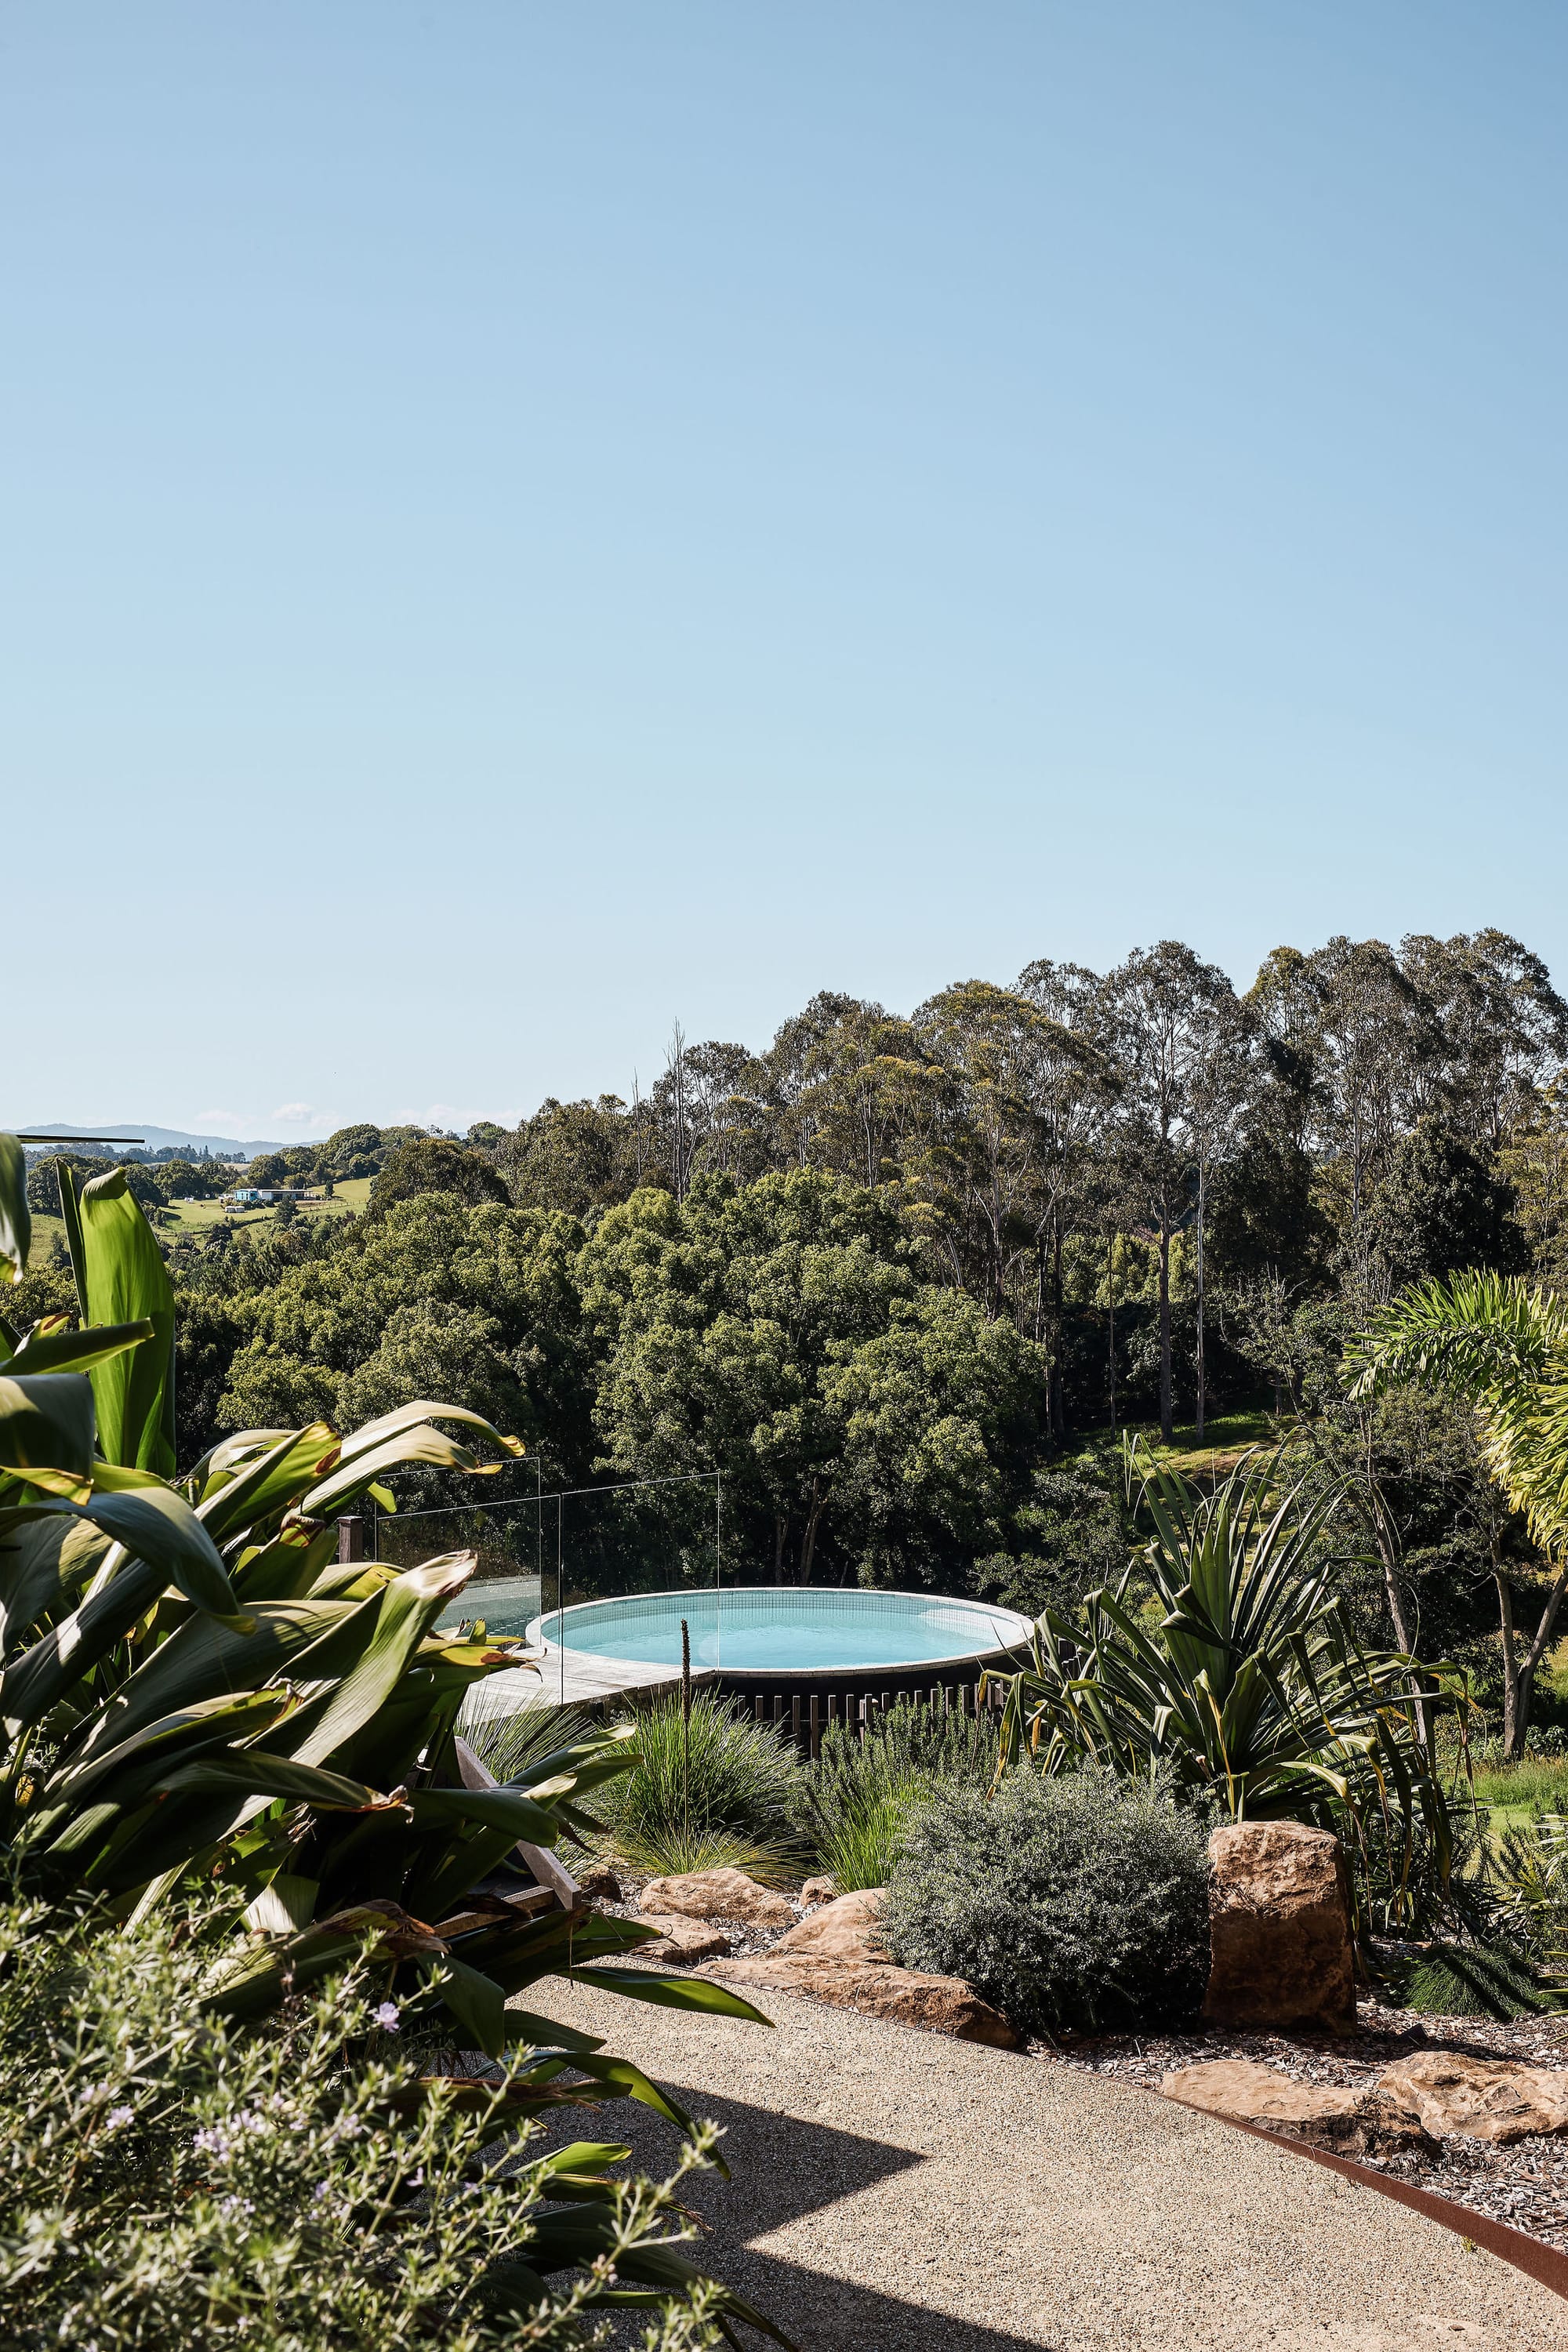 Rockpool Farm Byron Bay. Photography by Andy Macpherson. Round pool with timber walkway. Hillside views with lots of native plant life. Stone path.